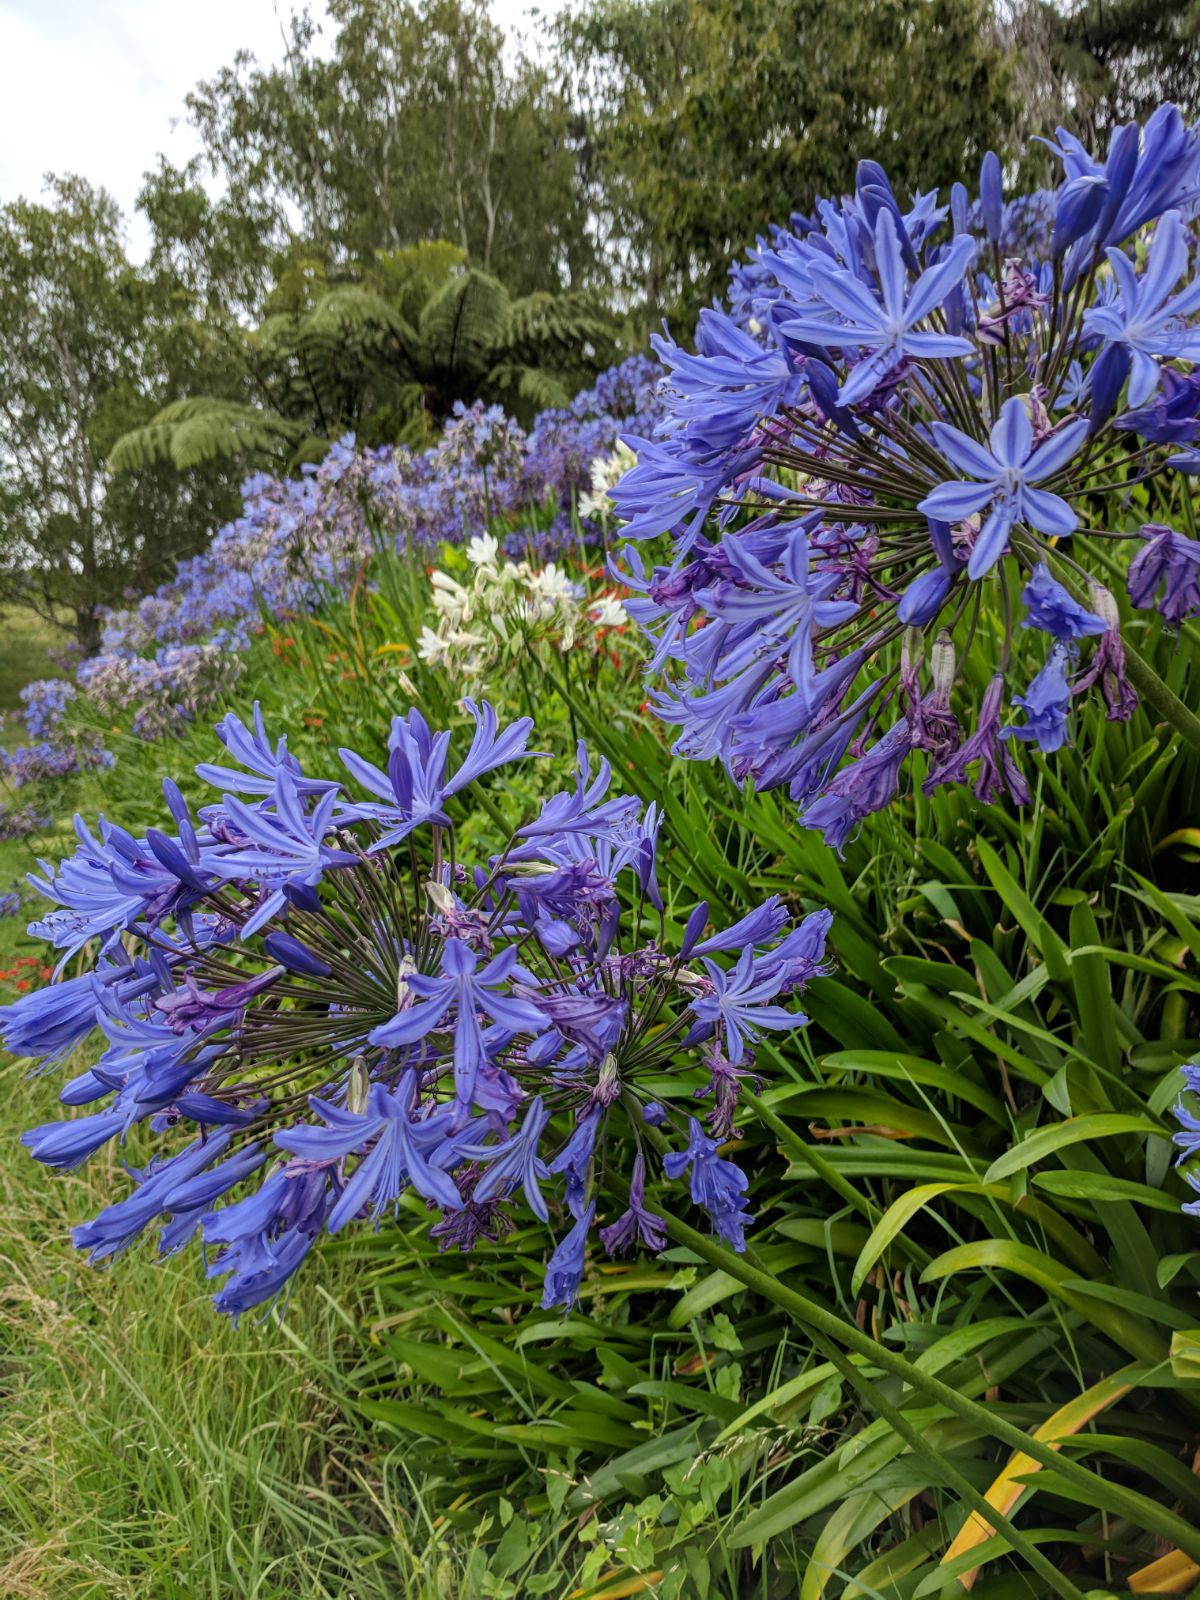 79--the beautiful agapanthus always brighten up a rainy day